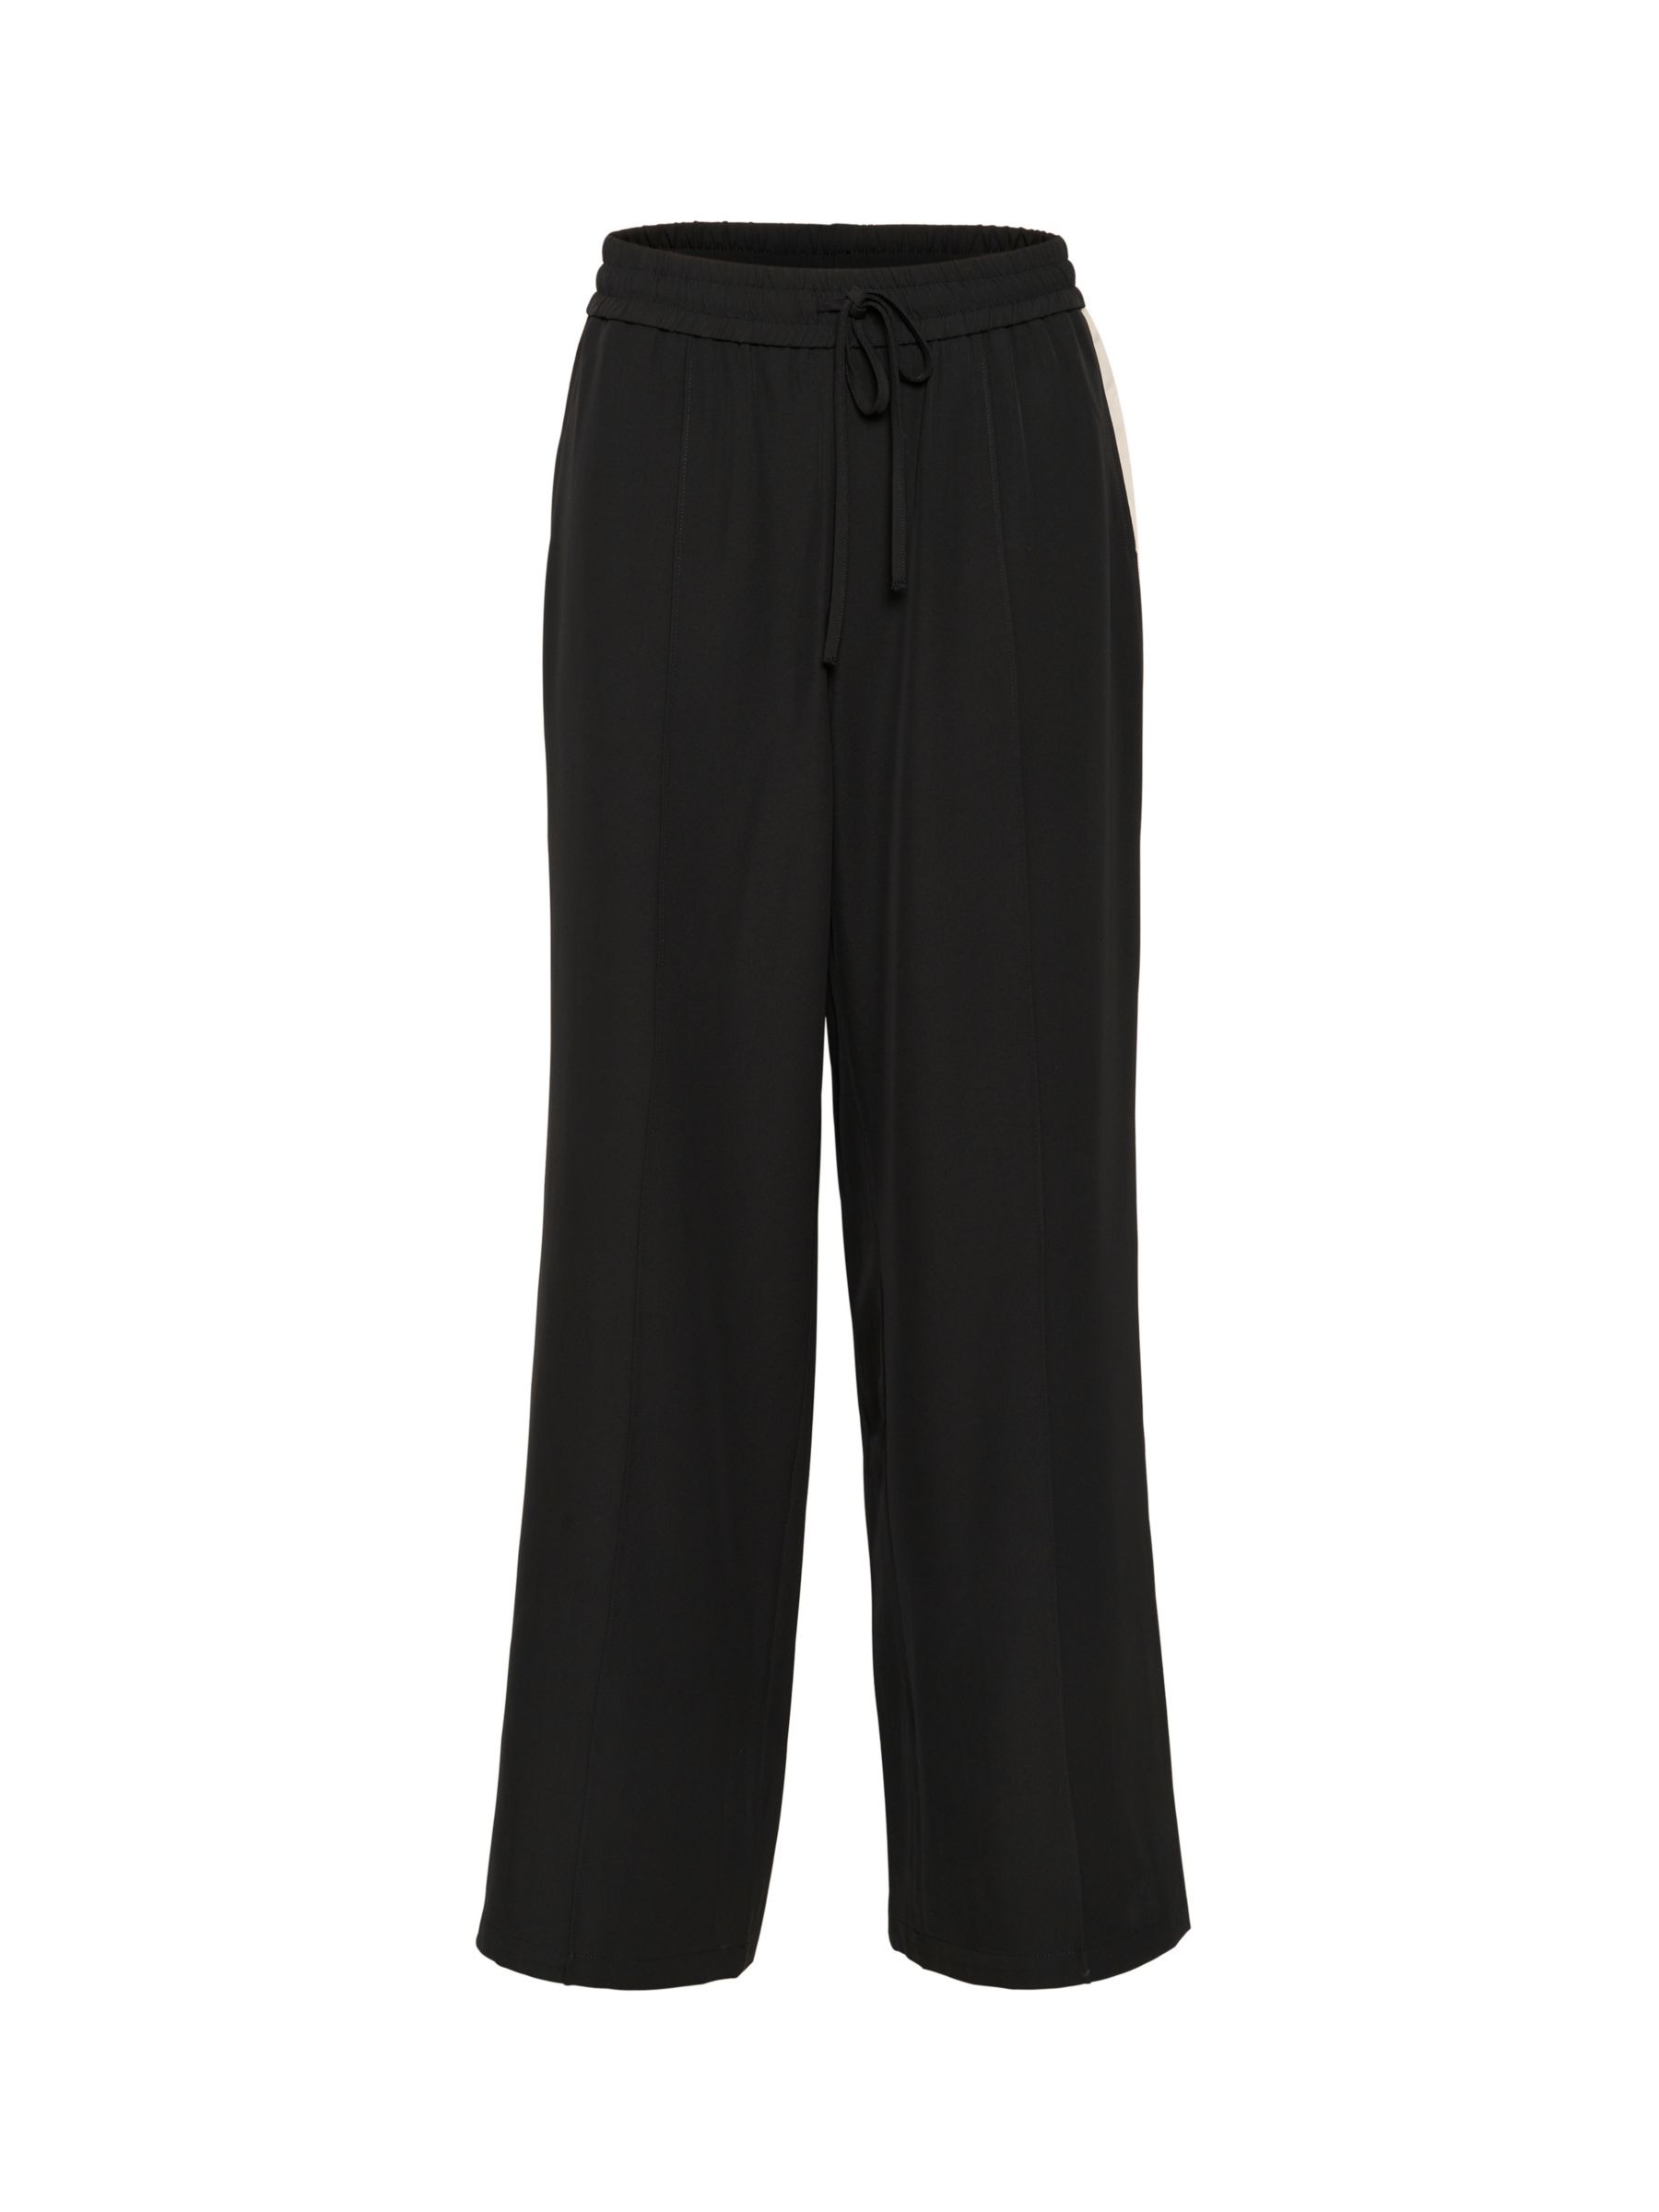 Buy KAFFE Signa High Waisted Striped Trousers, Black Deep Online at johnlewis.com